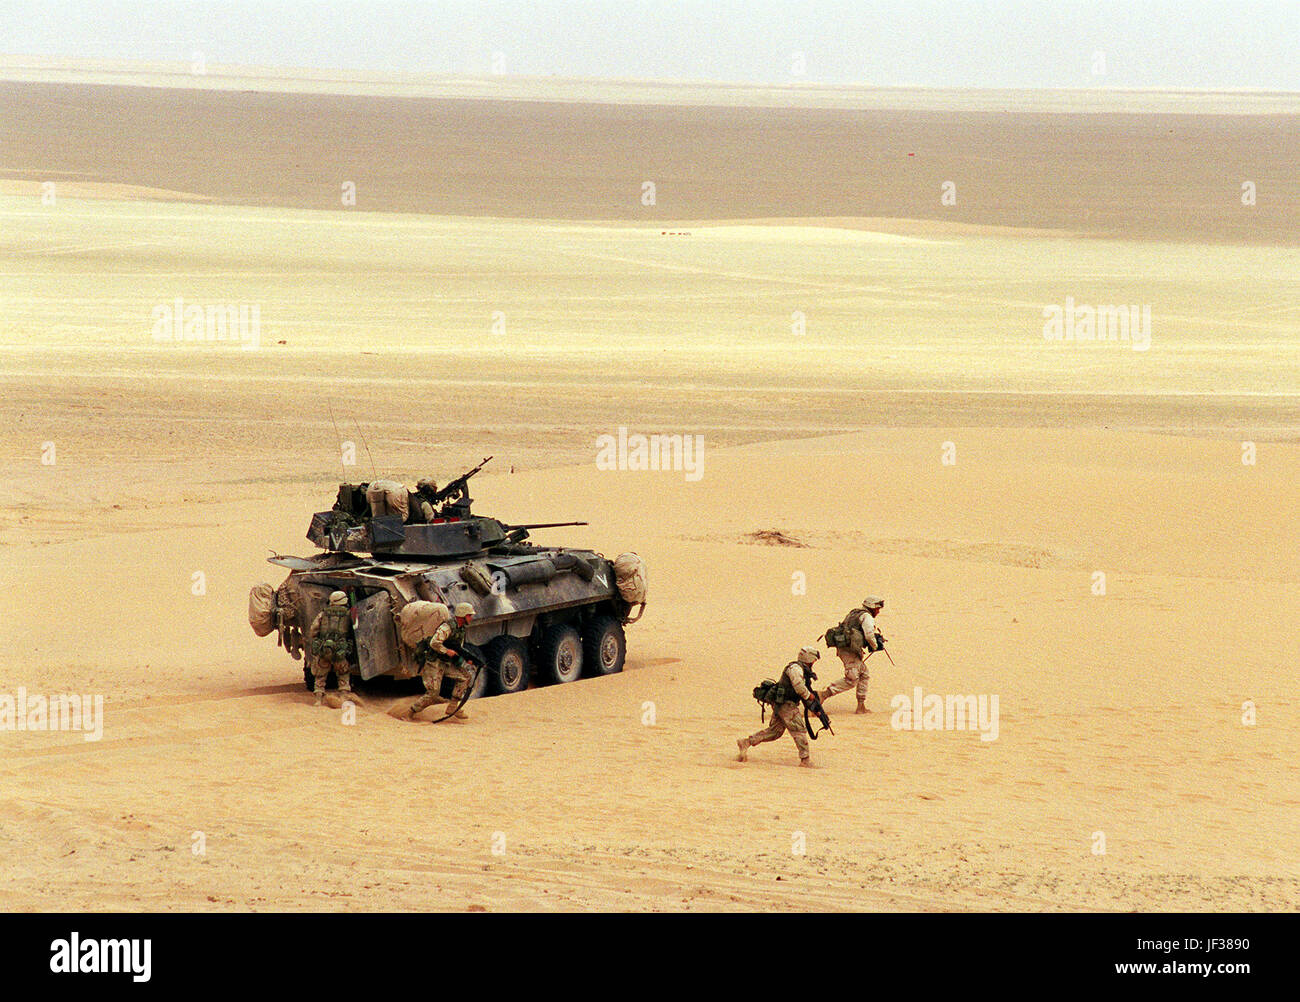 000408-D-9880W-104 U.S. Marine Corps riflemen deploy from a Light Armored Vehicle (LAV-25) during a live-fire training exercise at the Udairi Training Range in northern Kuwait on April 8, 2000.  After destroying the simulated enemy trucks with its turret-mounted 25 mm chain guns, the LAV deployed six Marine riflemen to deal with the remaining simulated enemy personnel.  The LAV is attached to the 1st Light Armored Reconnaissance Battalion, 15th Marine Expeditionary Unit.  DoD photo by R. D. Ward.  (Released) Stock Photo